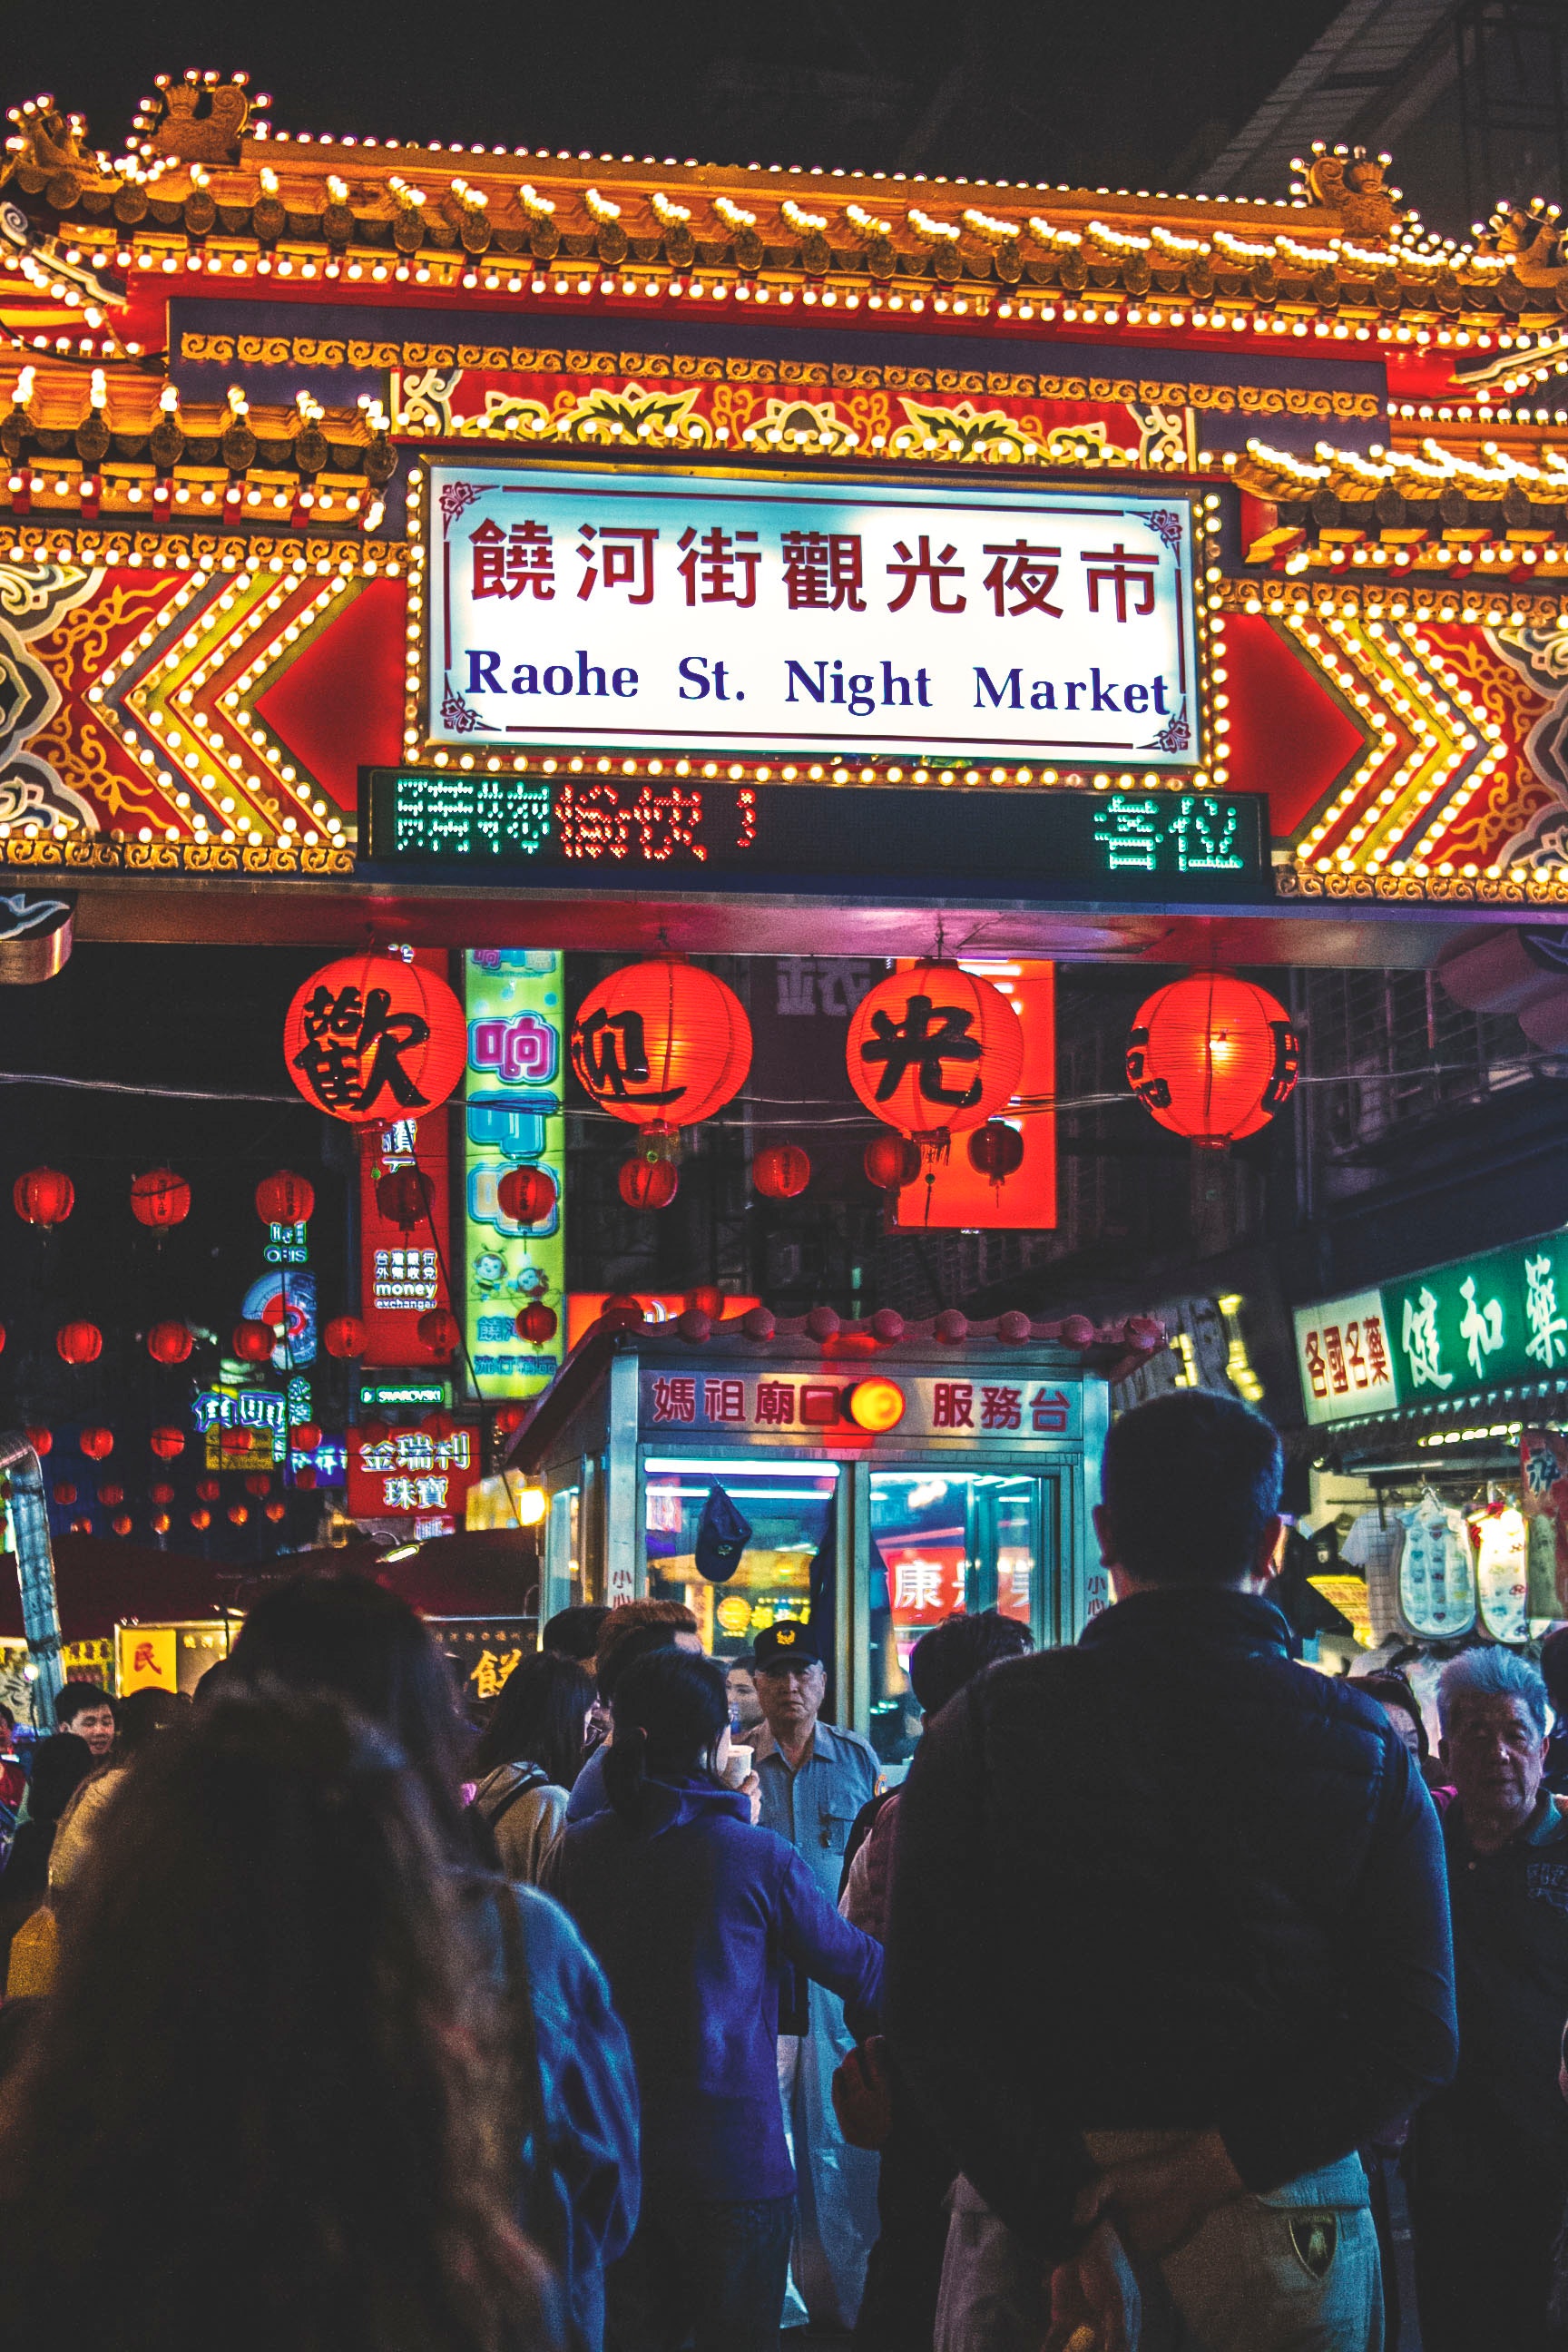 View of raohe st. night market arch with kanji texts and group of people photo